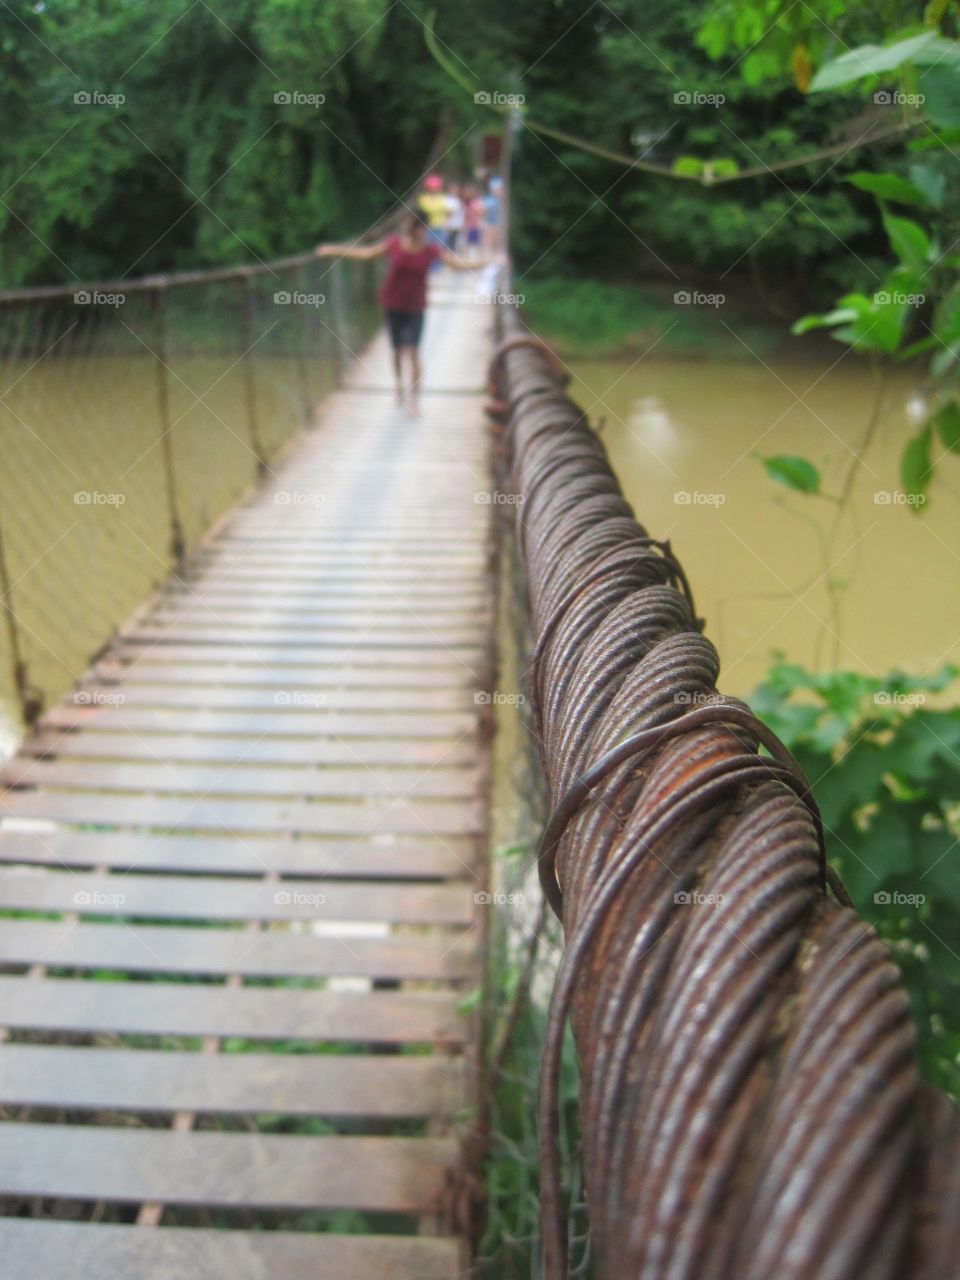 Hanging bridge over river in tropical forest, Philippines